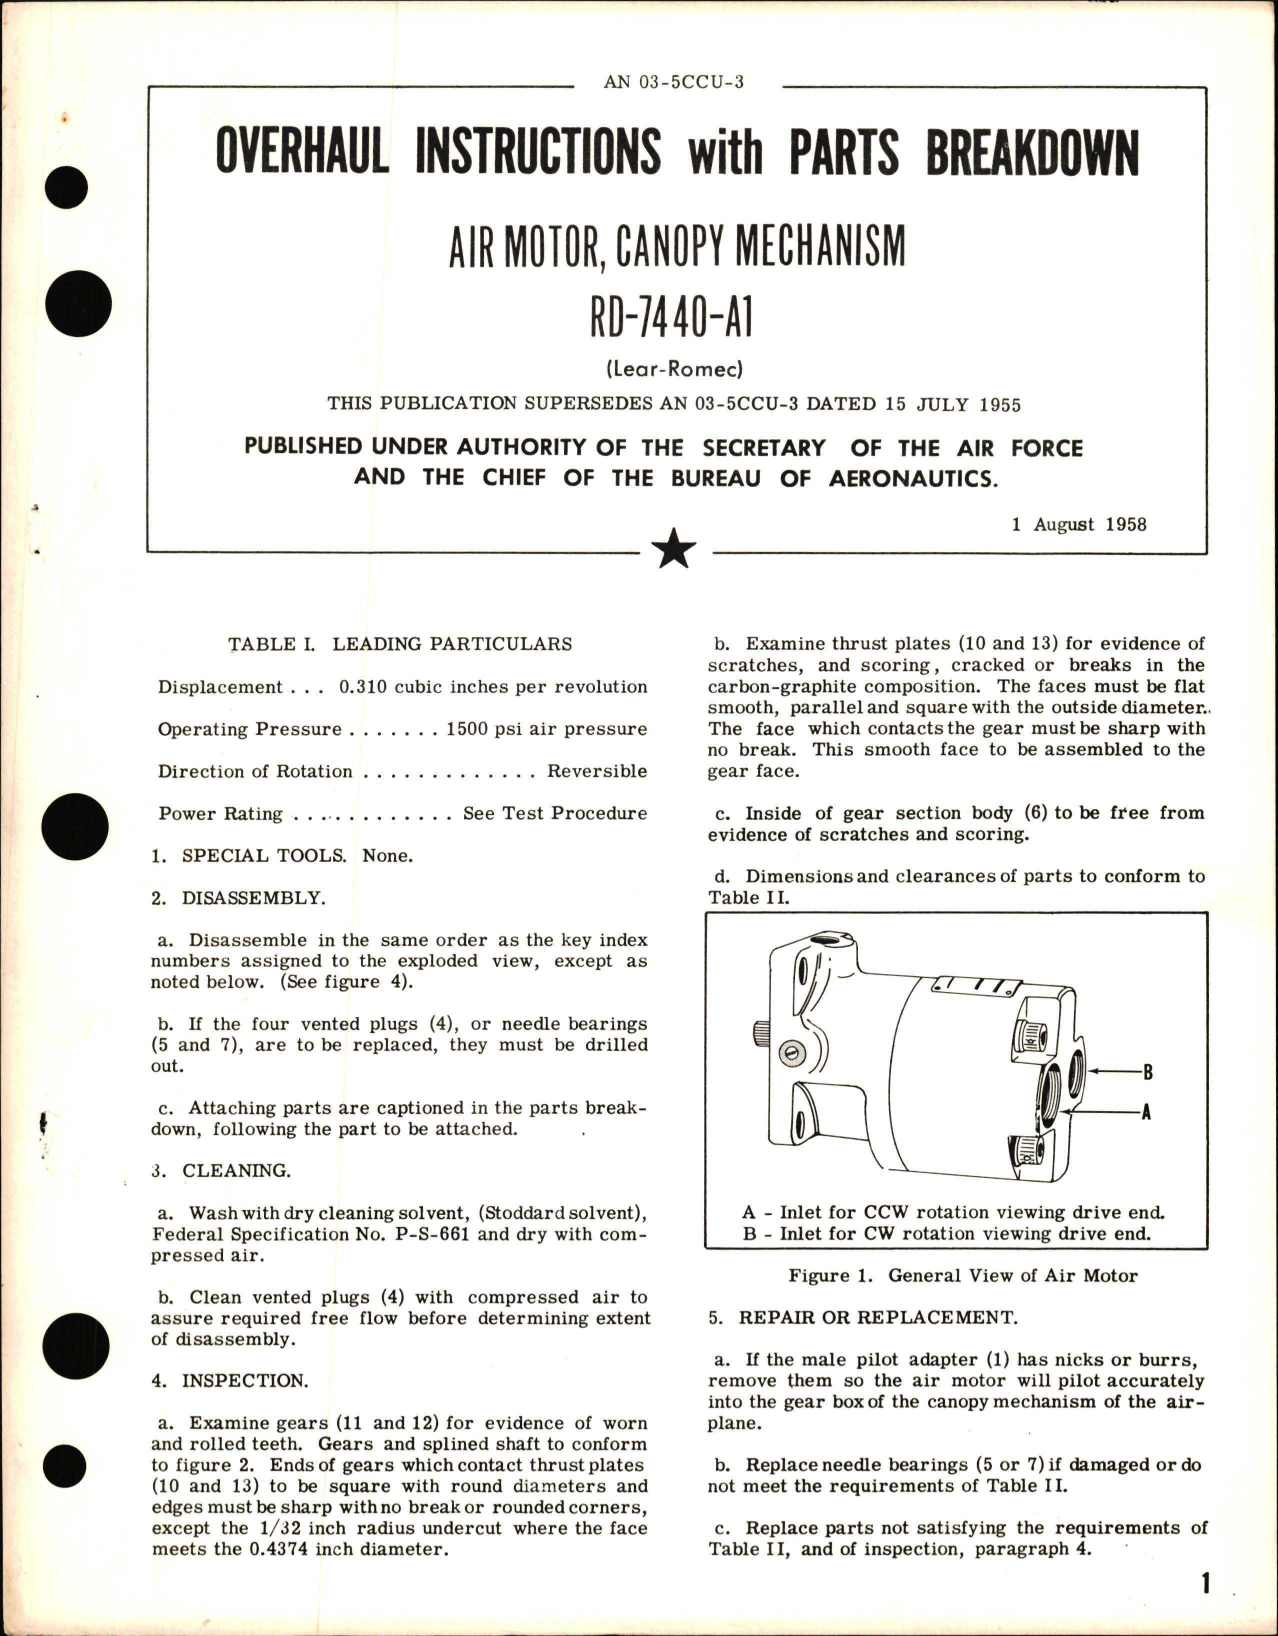 Sample page 1 from AirCorps Library document: Overhaul Instructions with Parts Breakdown for Air Motor, Canopy Mechanism - RD-74 40-A1 